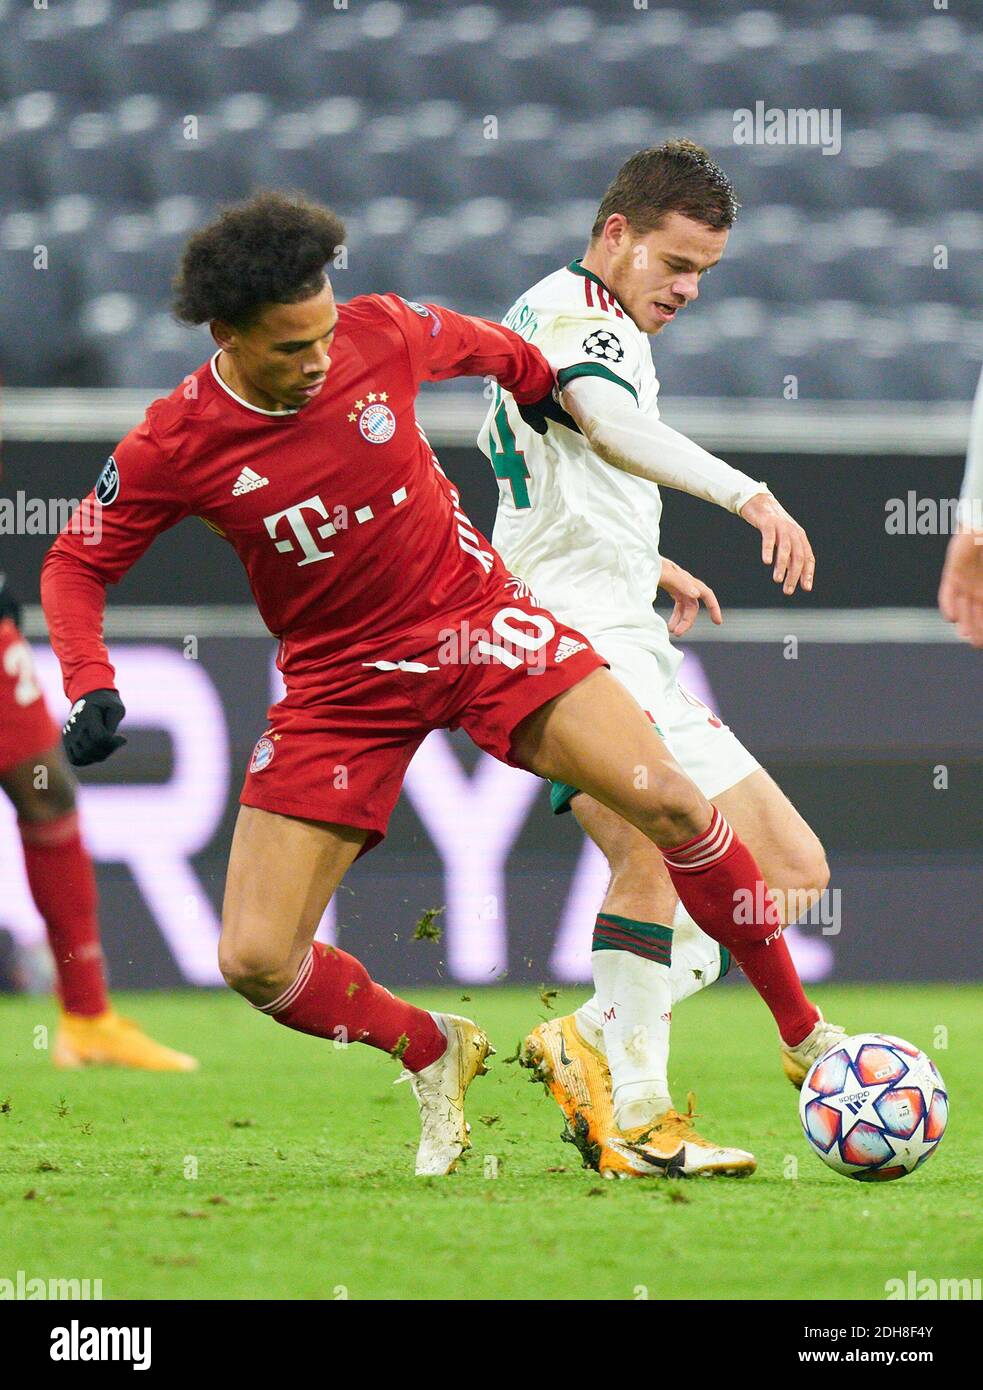 Leroy SANE, FCB 10  compete for the ball, tackling, duel, header, zweikampf, action, fight against Dmitrii RYBCHINSKII, Lok Moskau Nr. 94  in the match  FC BAYERN MUENCHEN - LOKOMOTIVE MOSKAU 2-0 of football UEFA Champions League group stage in season 2020/2021 in Munich, December 9, 2020.   © Peter Schatz / Alamy Live News Stock Photo